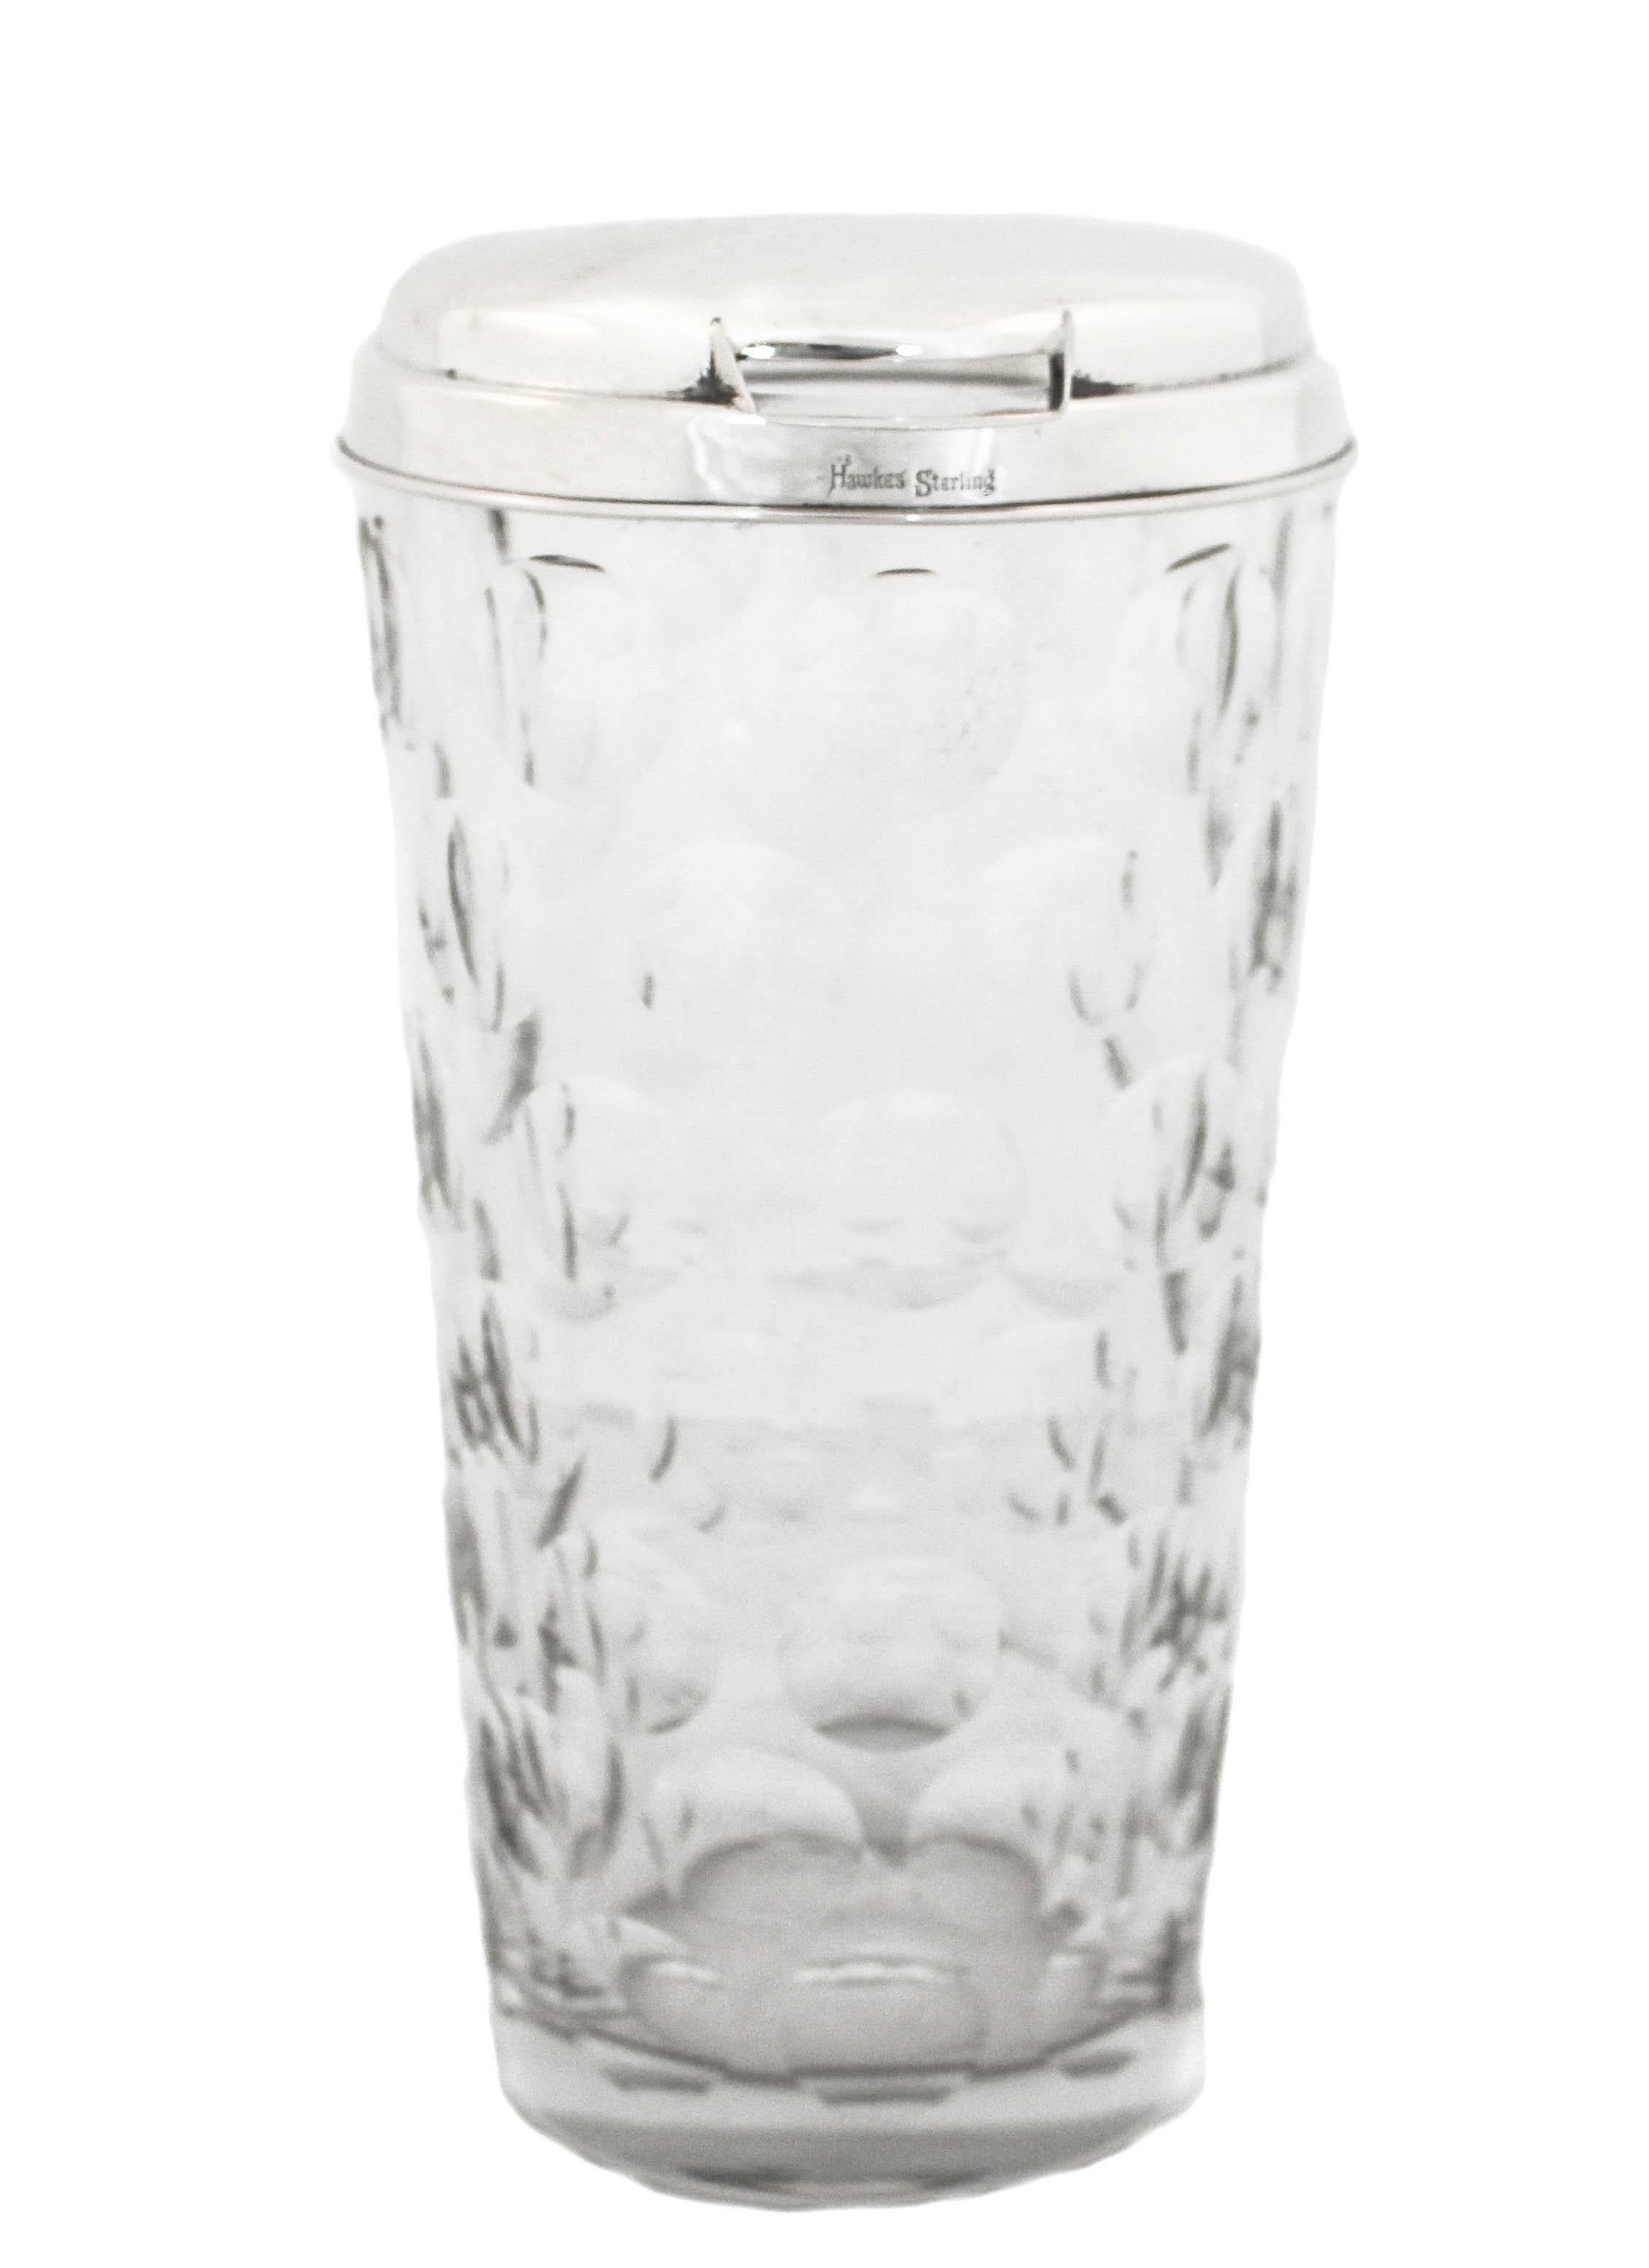 We are delighted to offer you this crystal and sterling silver cocktail shaker. Manufactured by the Hawkes Glass Company. Based in Corning, NY, T.G. Hawkes & Co. (c.1880-1959) was established by Thomas Gibbons Hawkes (1846-1913). Born in Ireland,